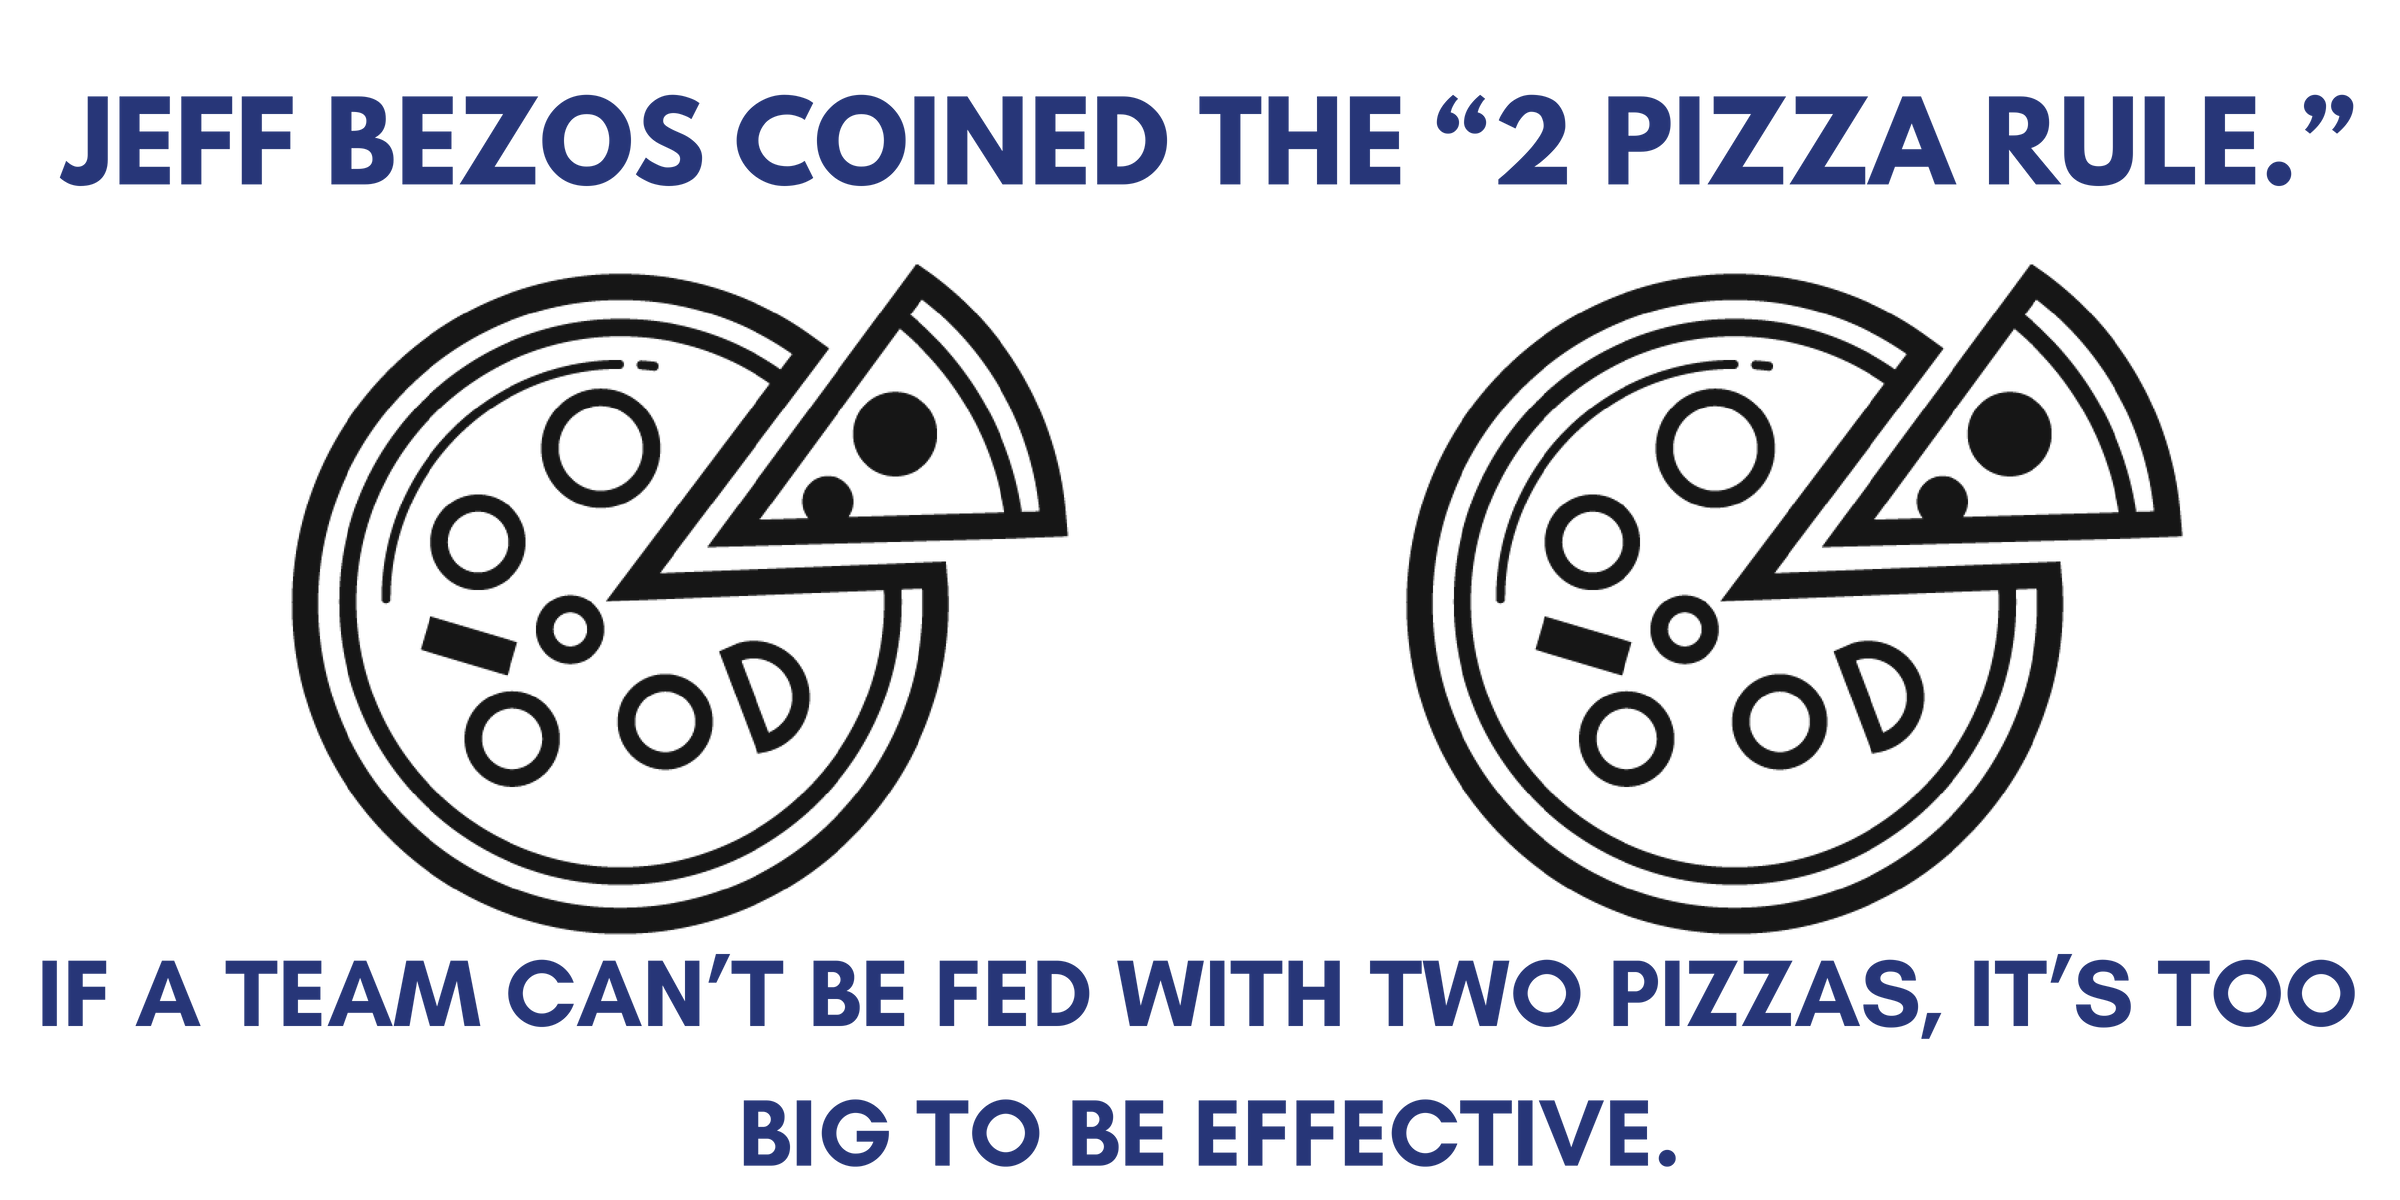 Jeff Bezos coined the "2 pizza rule." If a team can't be fed with two pizzas, it's too big to be effective.